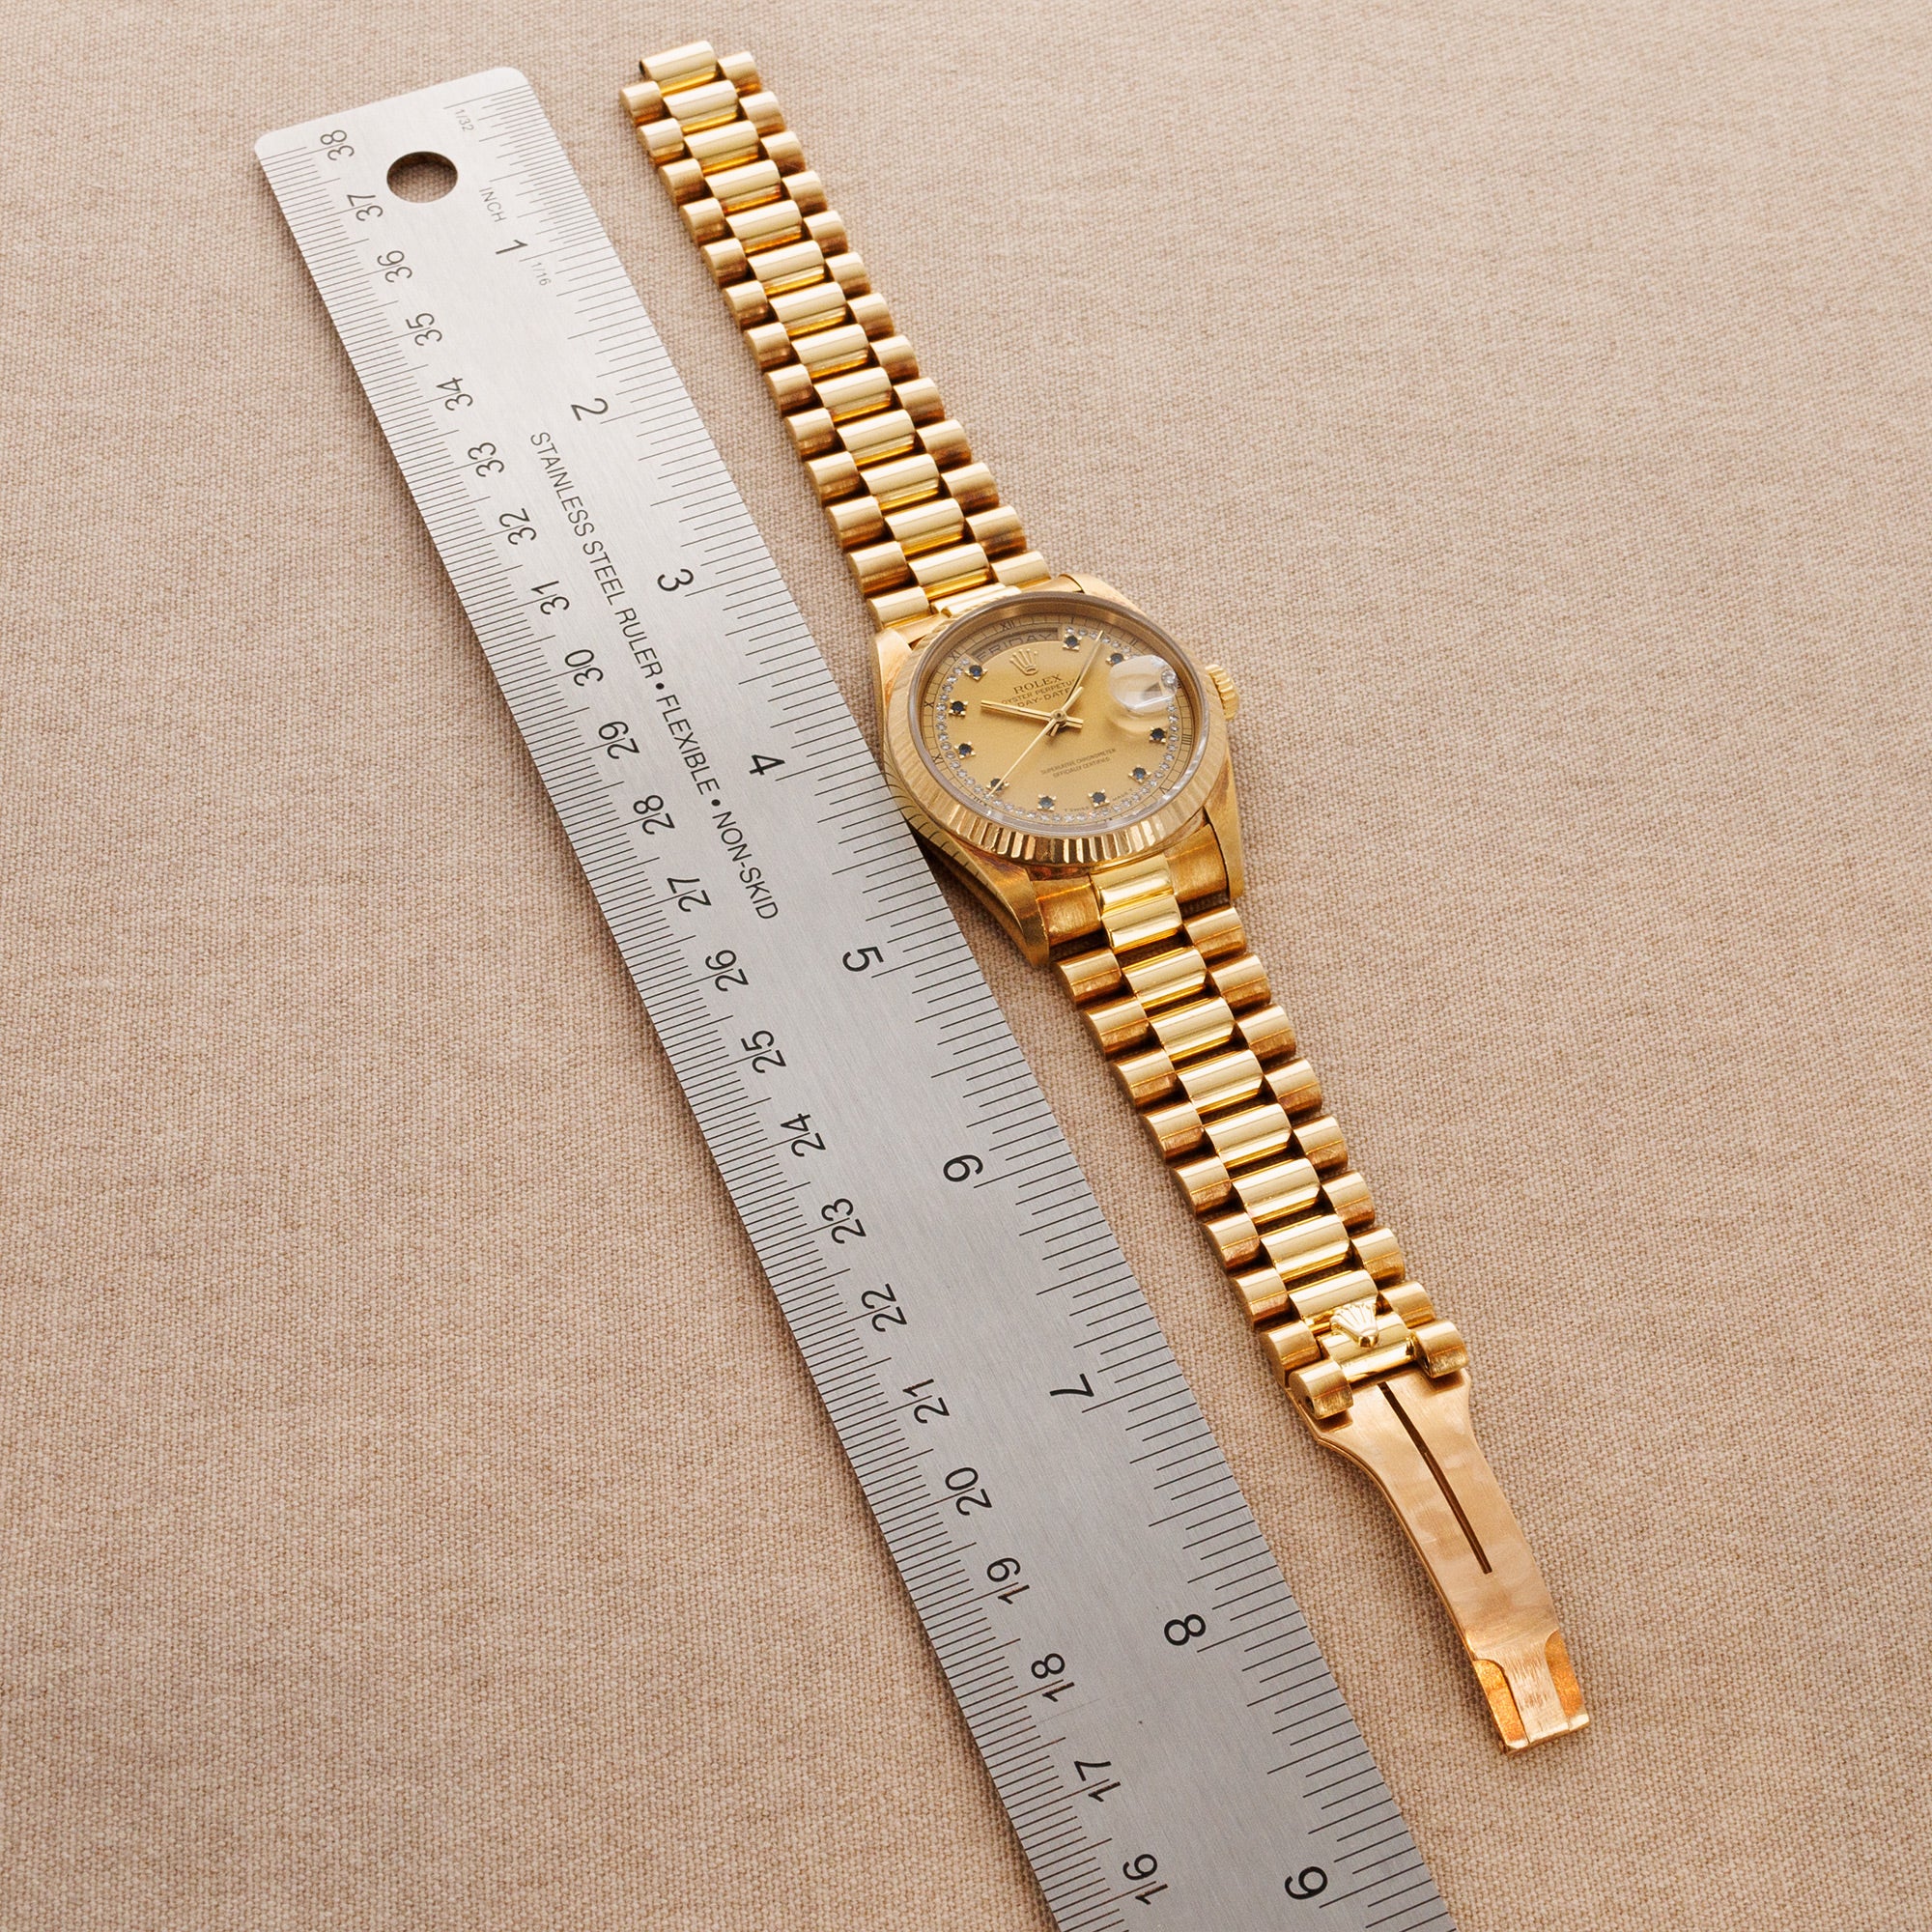 Rolex Yellow Gold Day Date Ref. 18238 with Sapphire String Dial